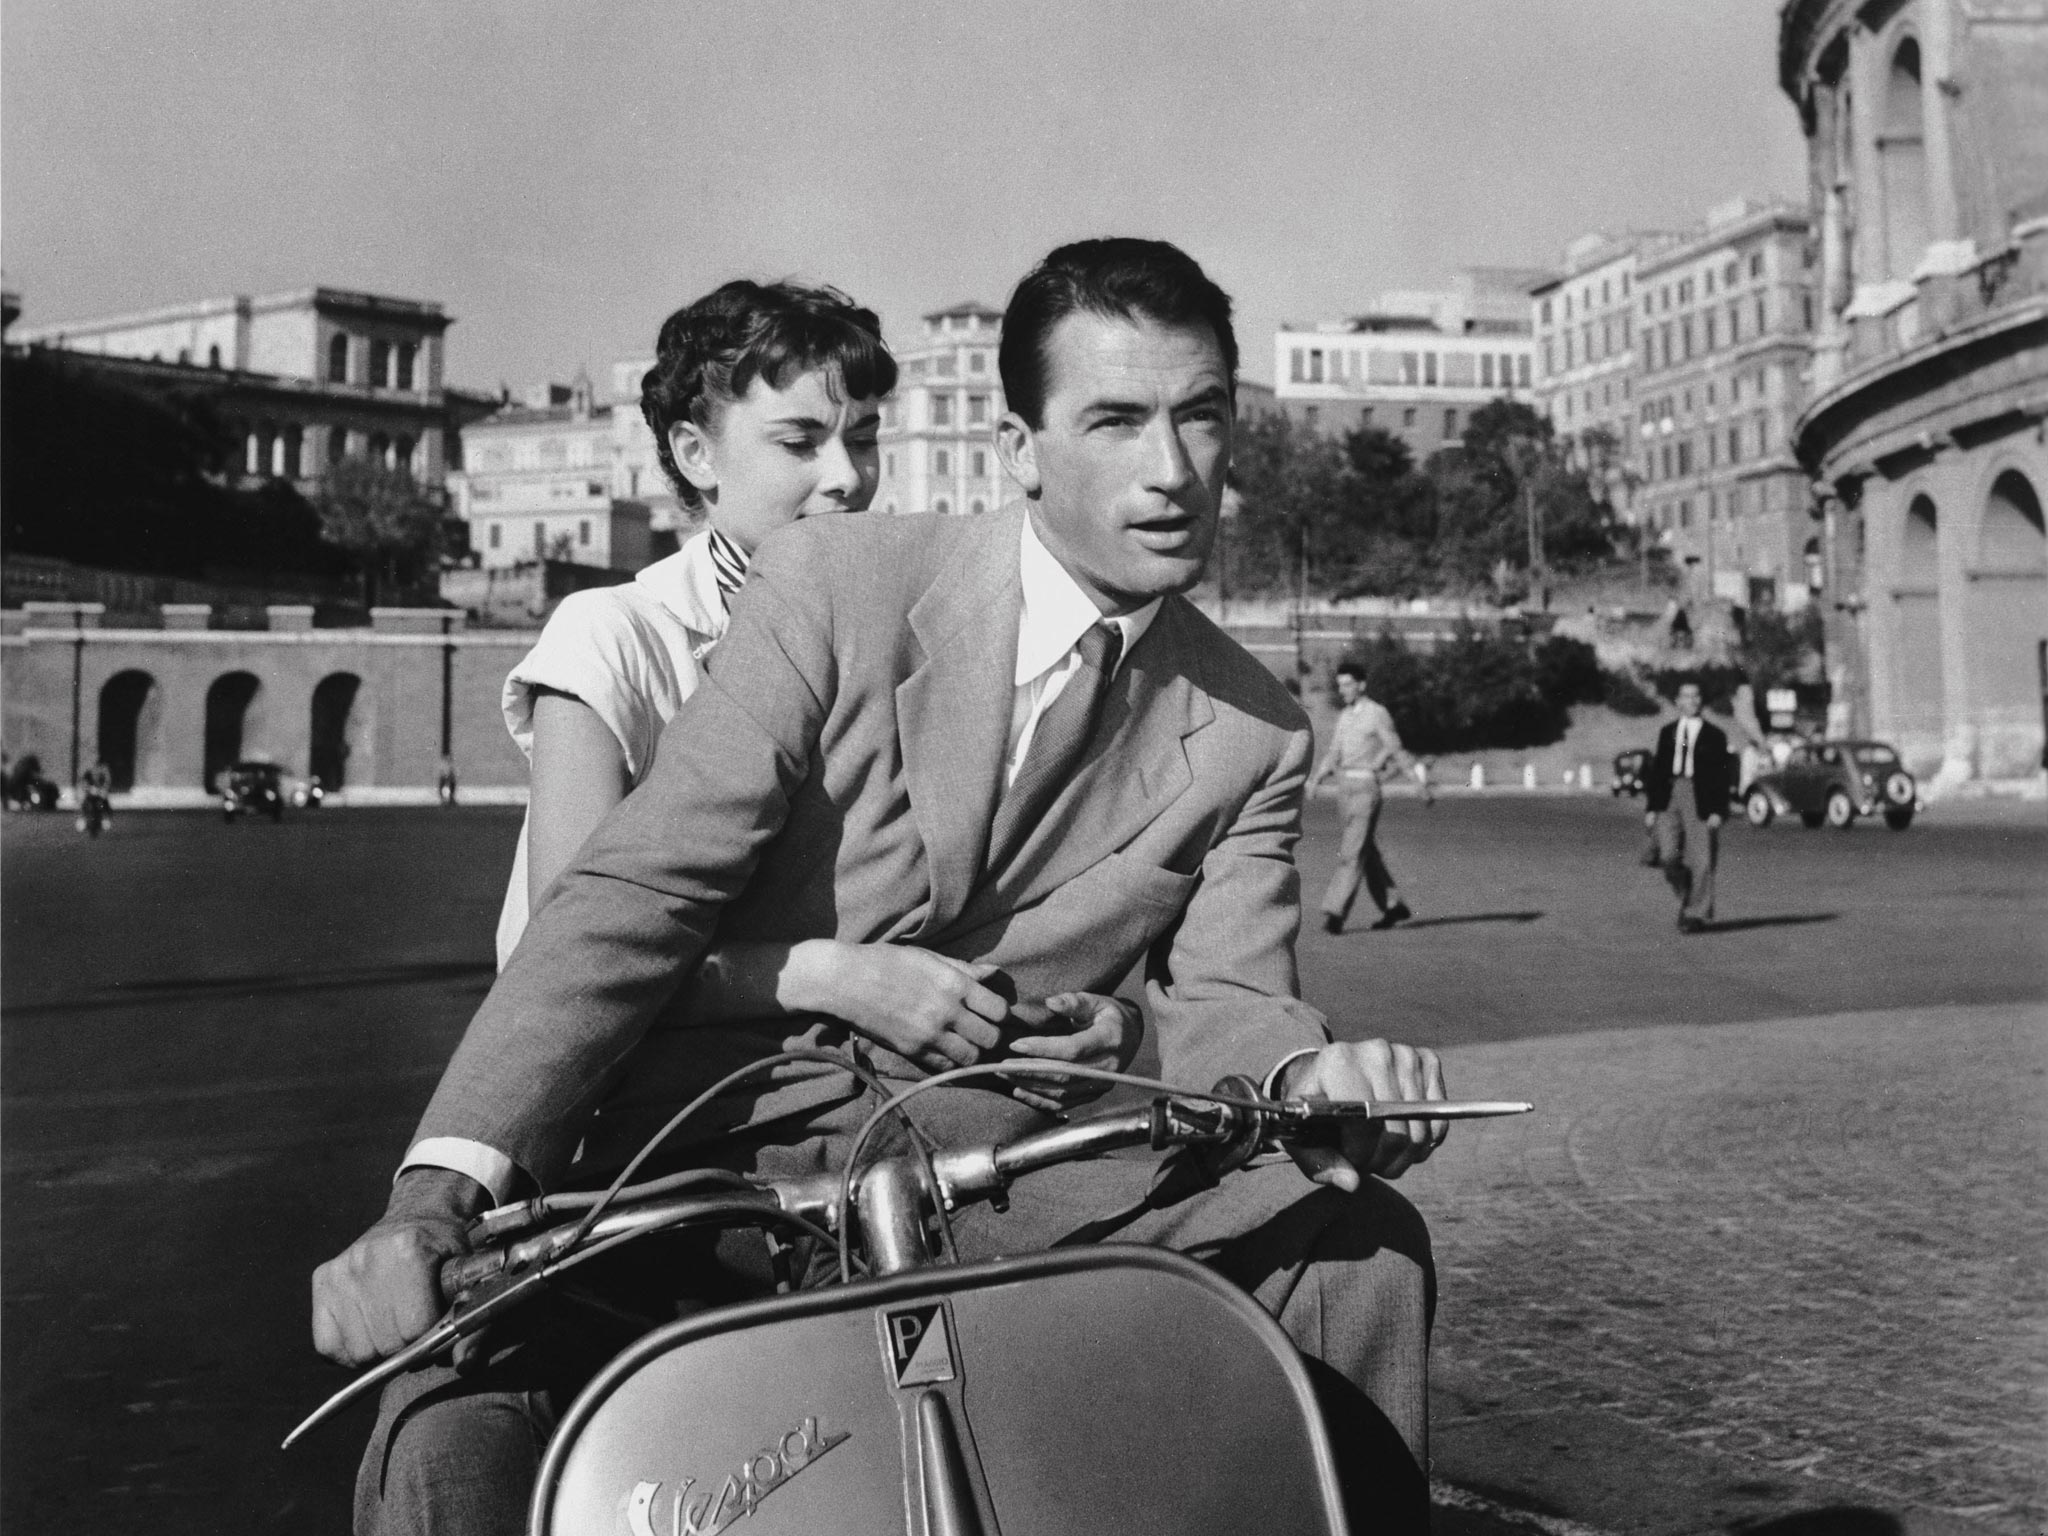 Audrey Hepburn and Gregory Peck in ‘Roman Holiday’ (1953)